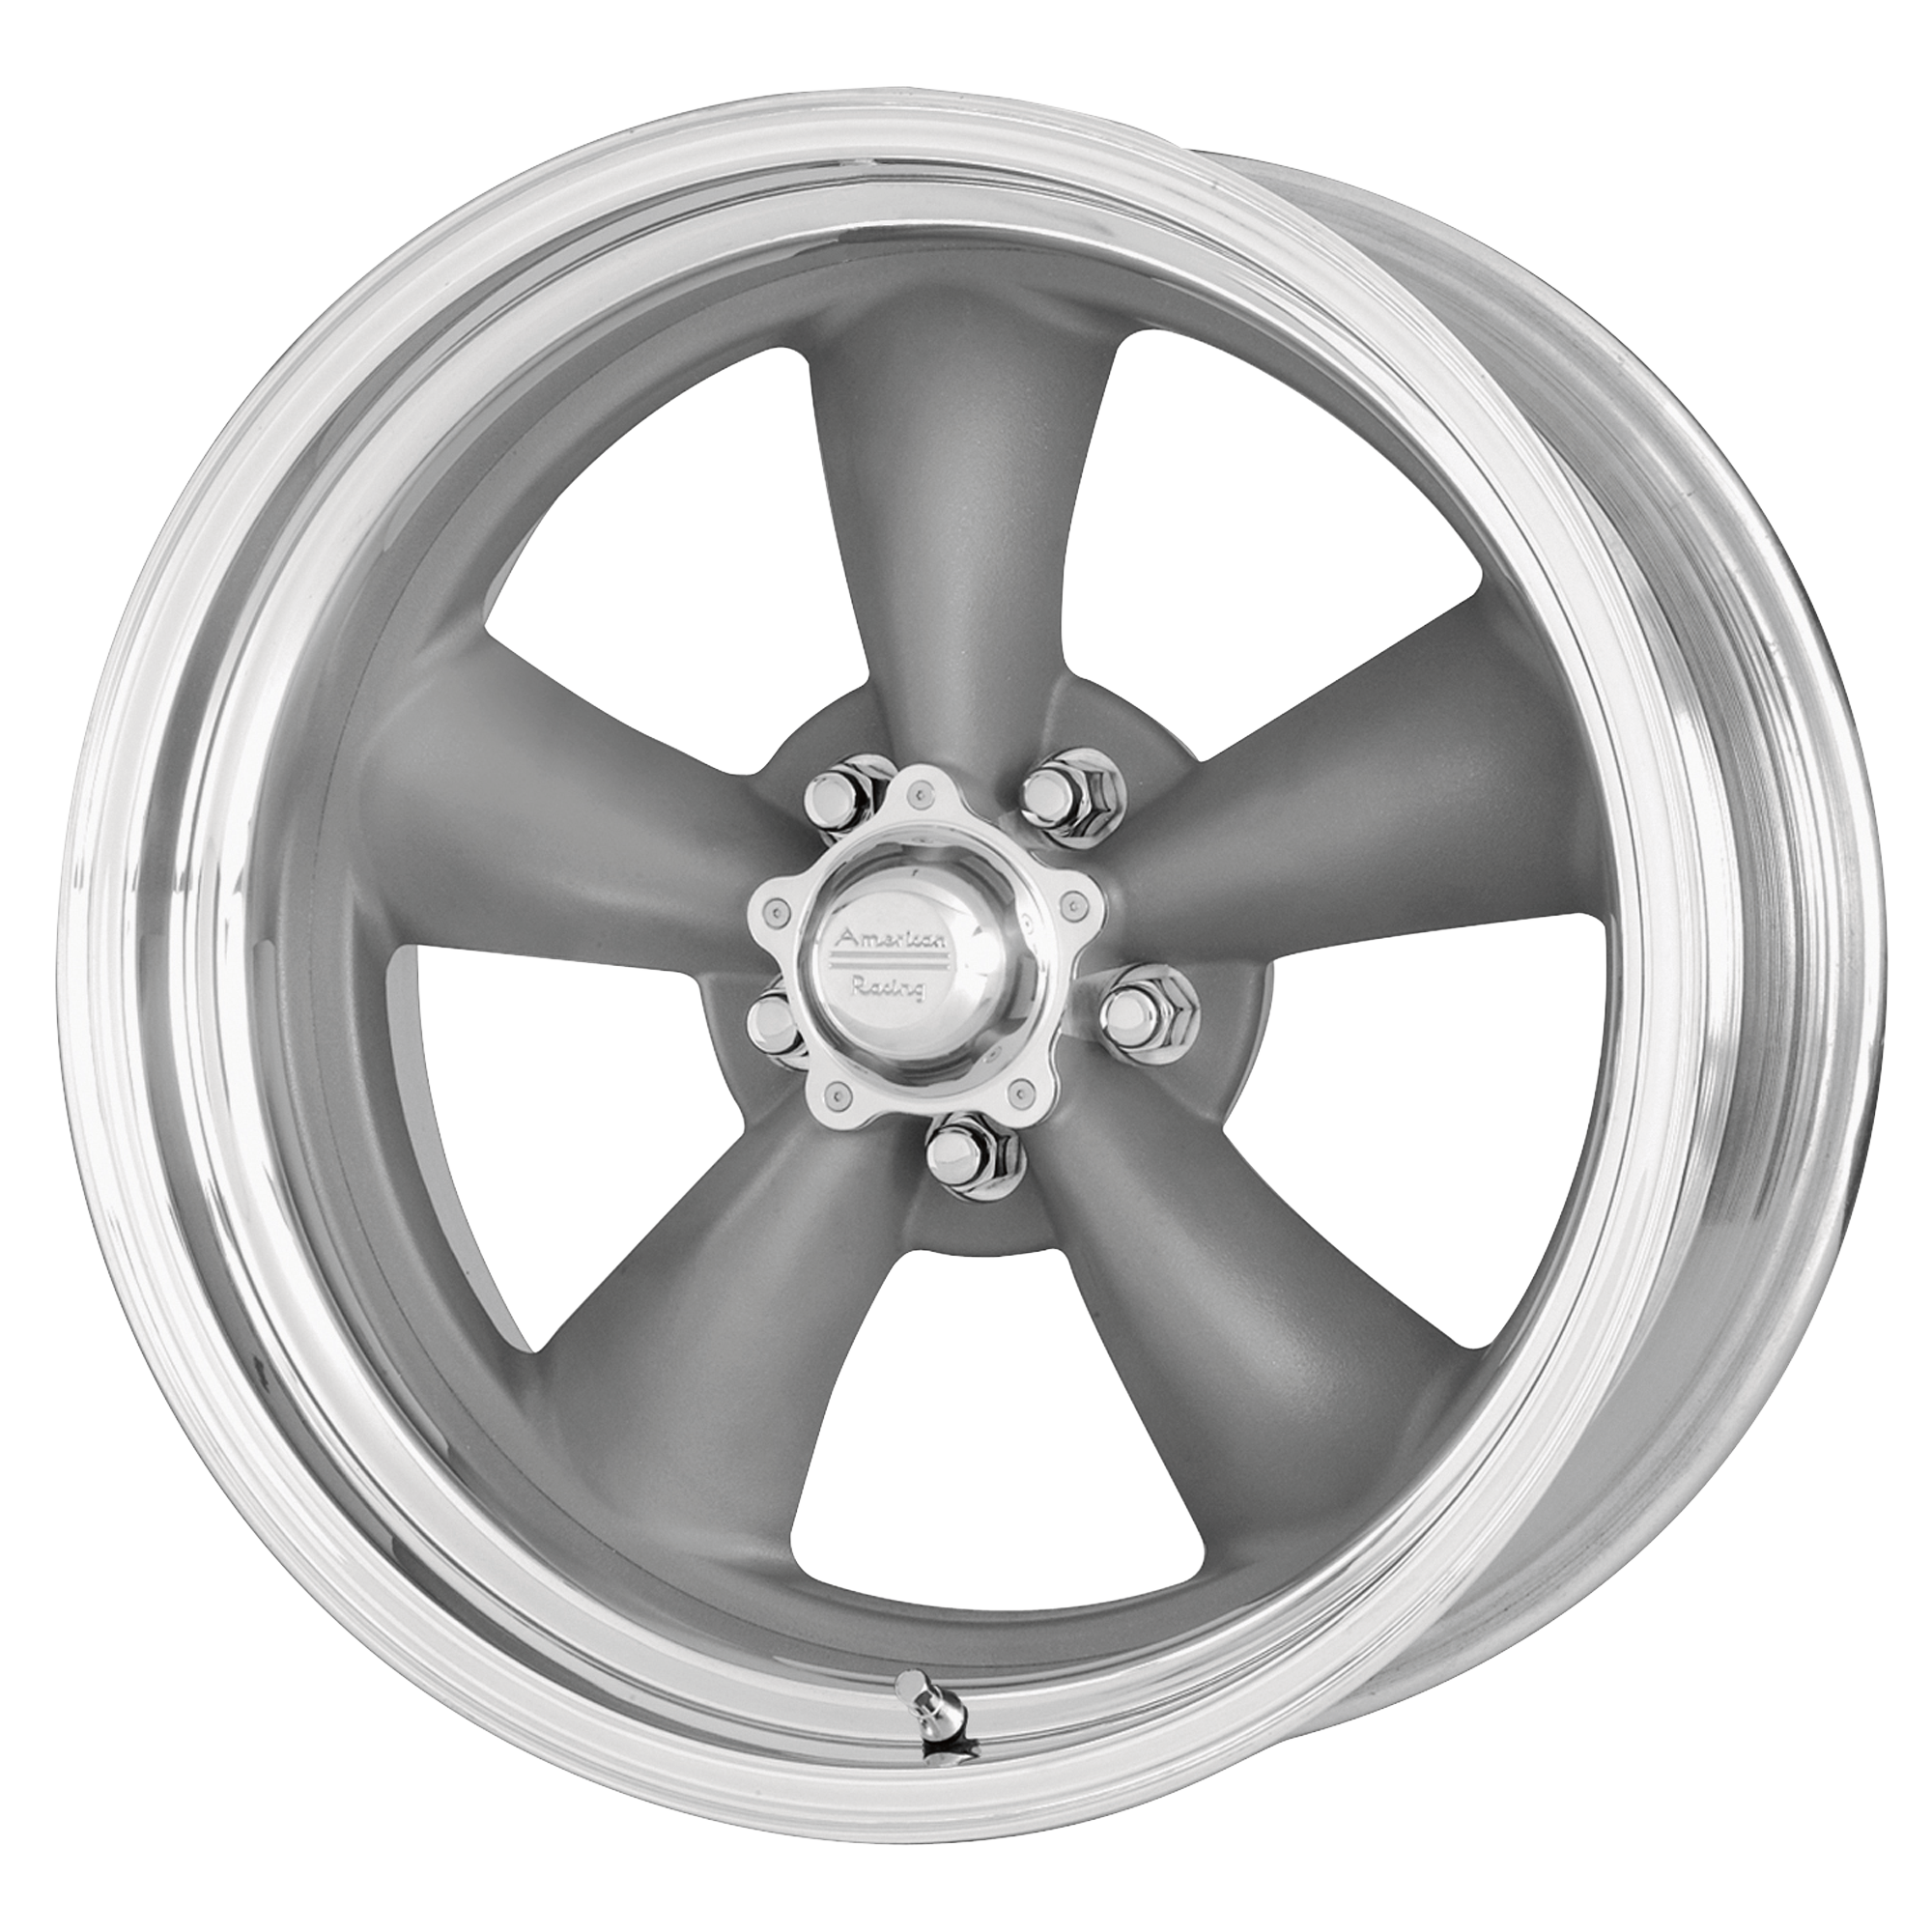 CLASSIC TORQ THRUST II ONE PIECE 14x6 5x120.65 MAG GRAY W/ MACHINED LIP (-2 mm) - Tires and Engine Performance